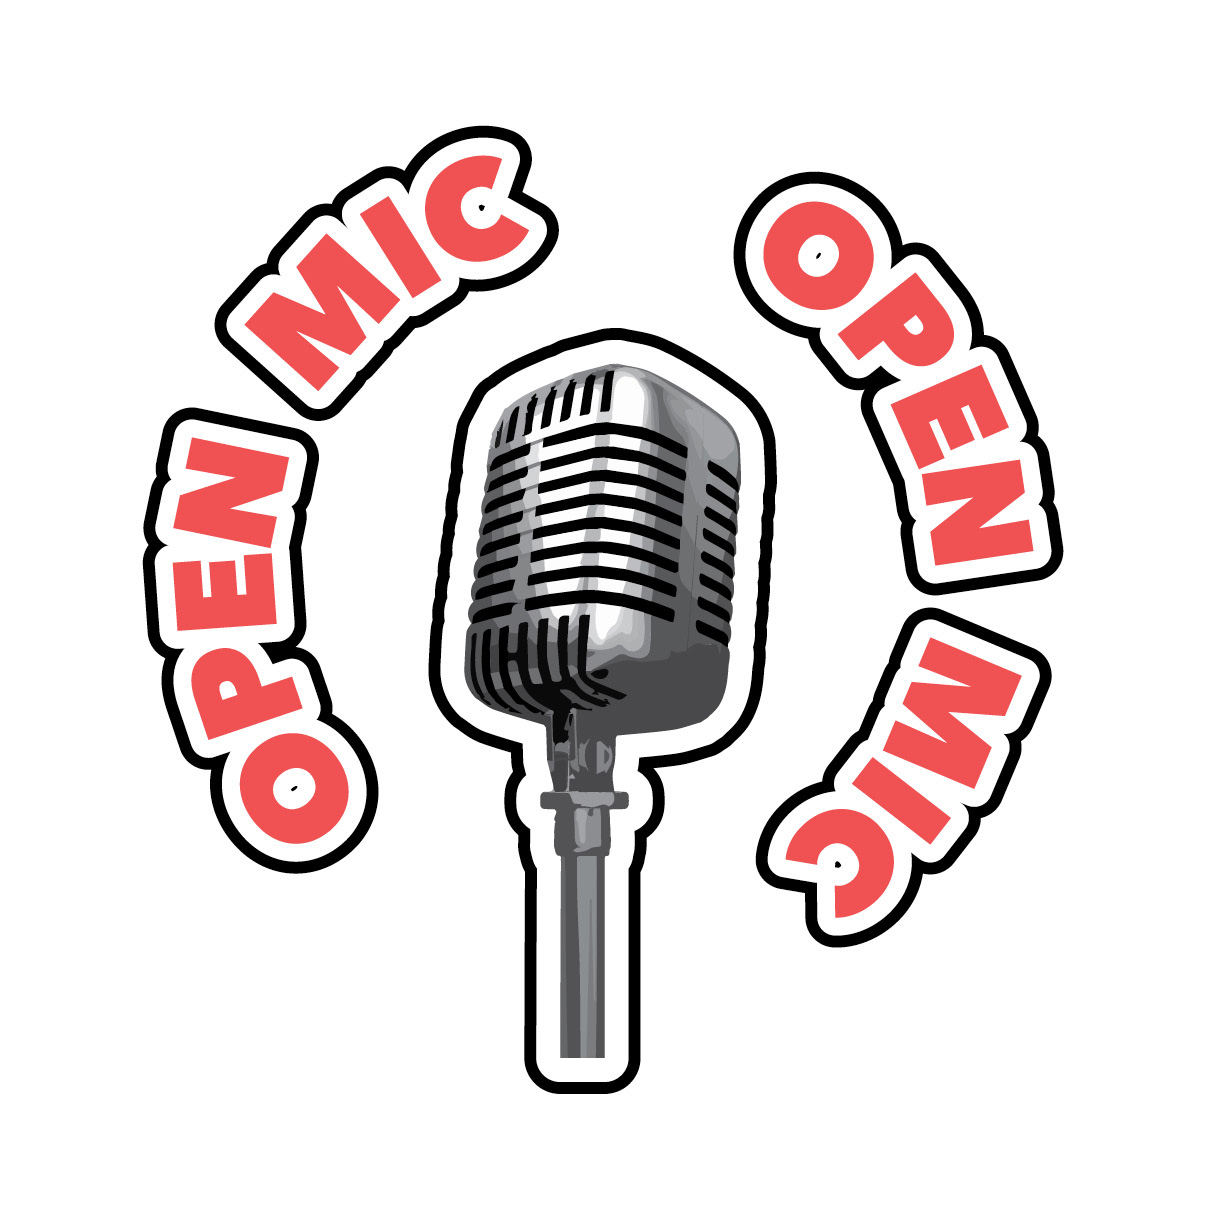 Clip art image of an old fashioned microphone and around it are the words Open Mic written out in red. 